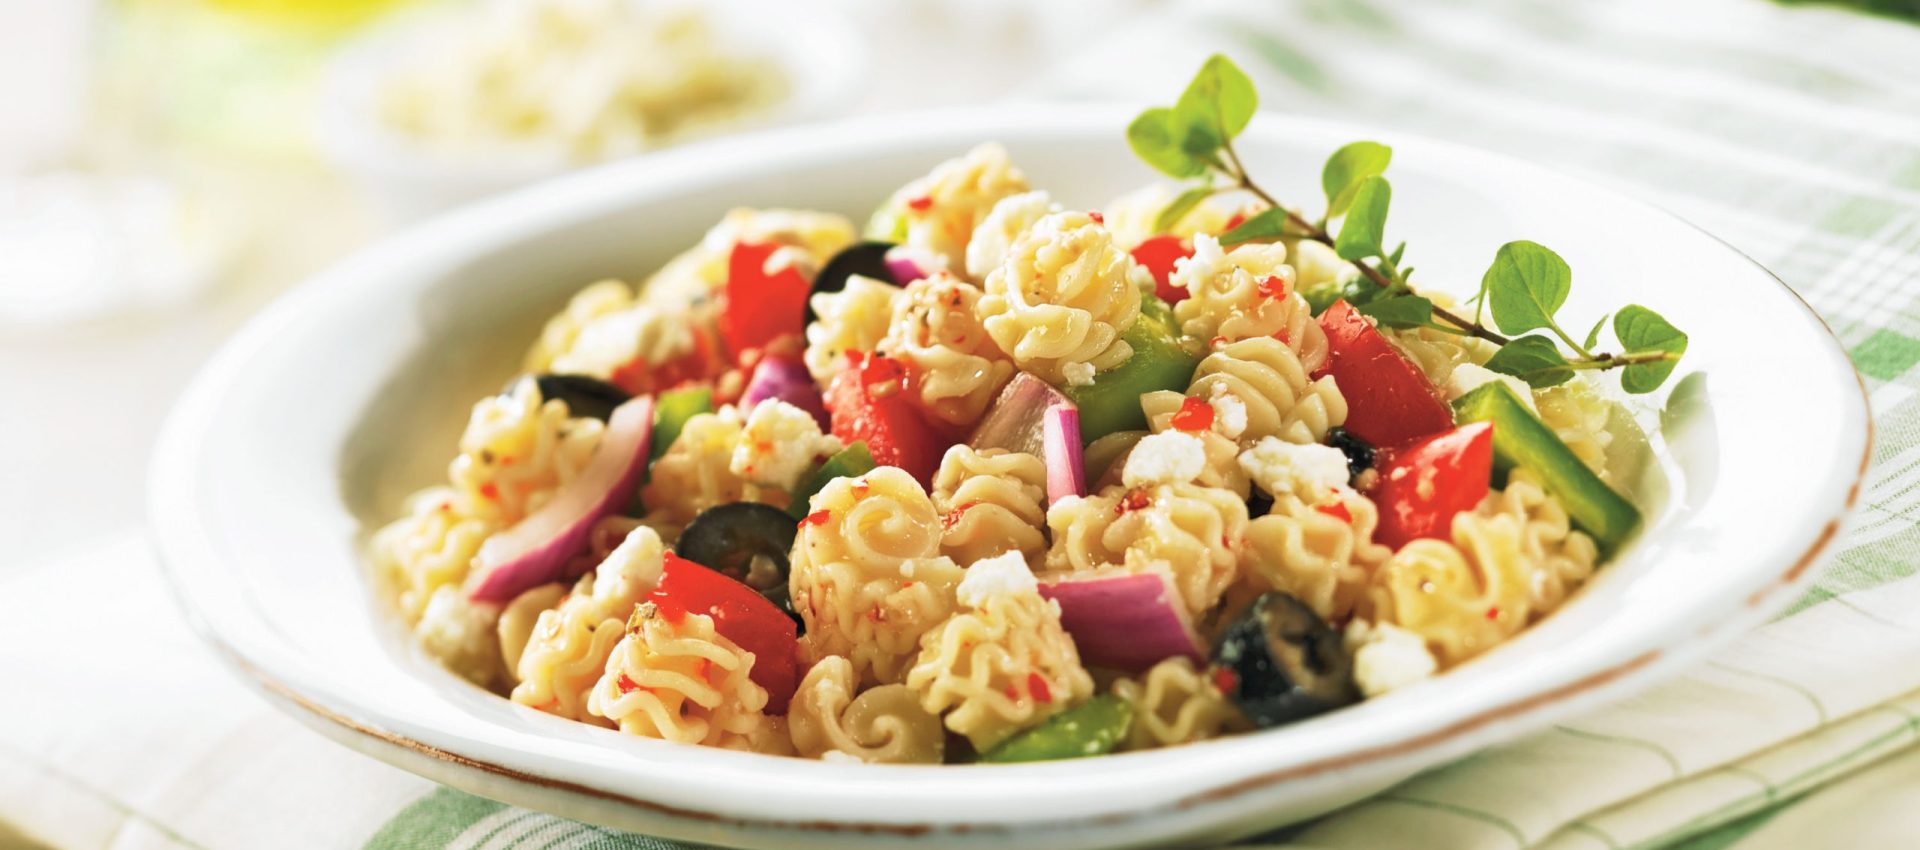 Flavors of the Mediterranean come to life with pasta in this great summertime salad recipe.